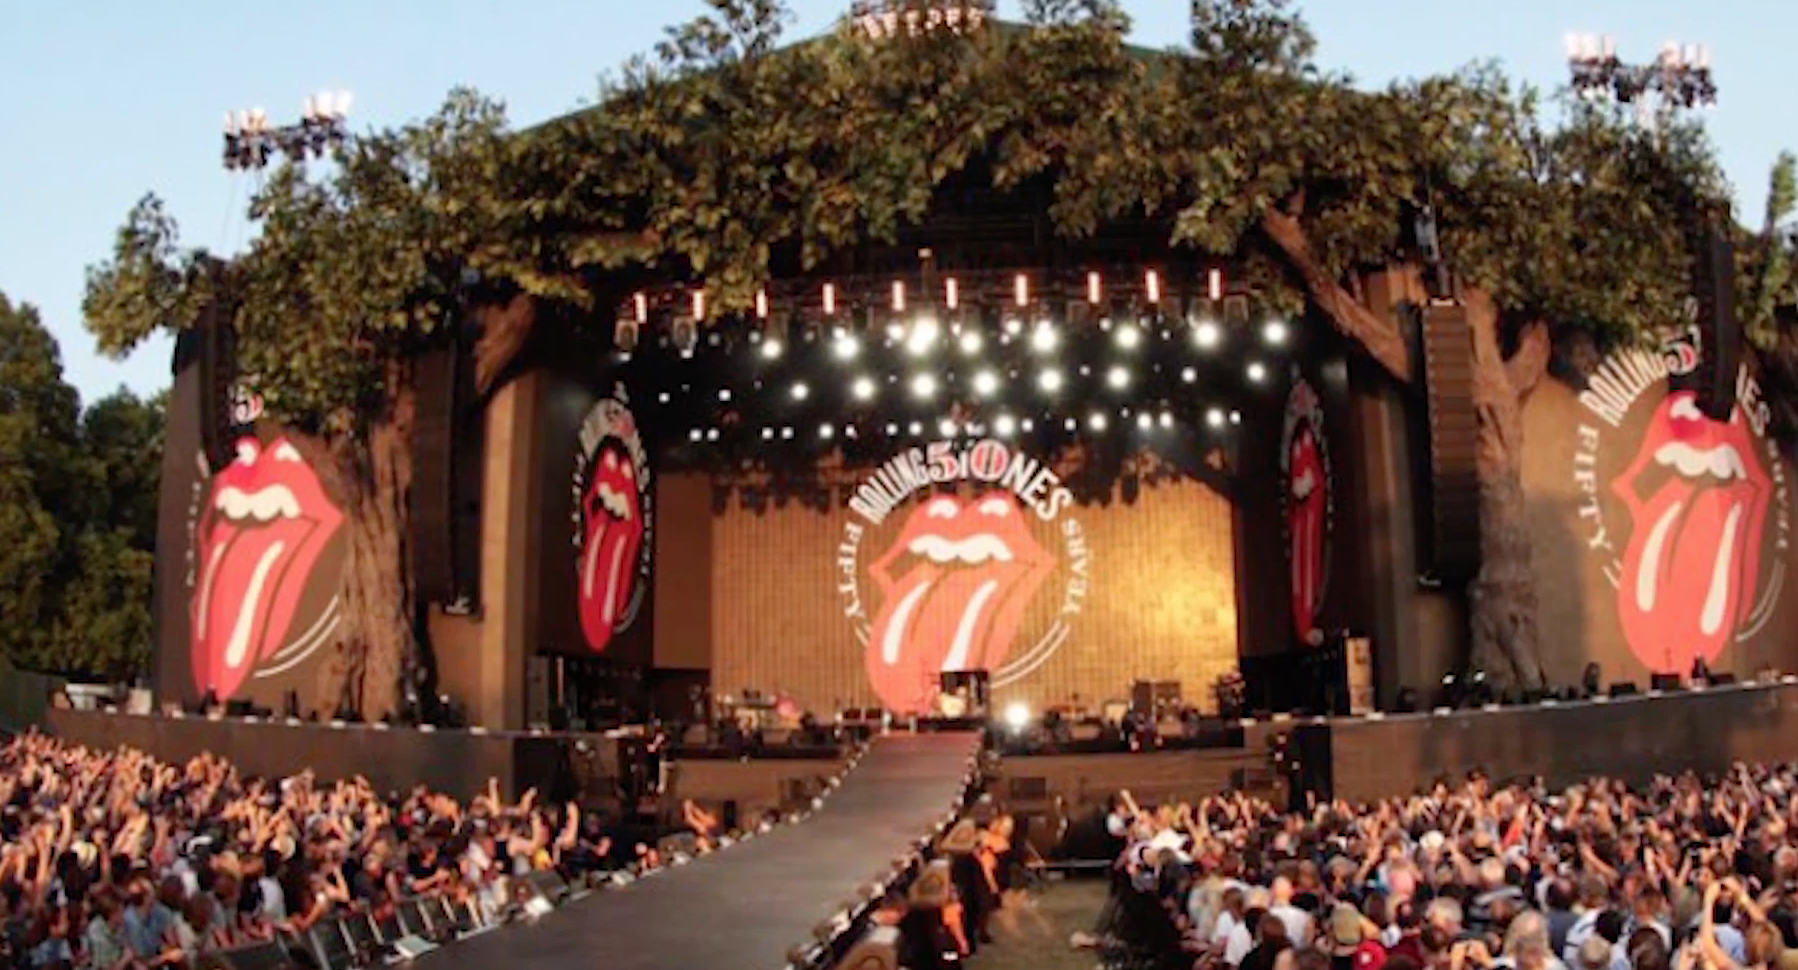 Shot of stage for Rolling Stones 50 years party event